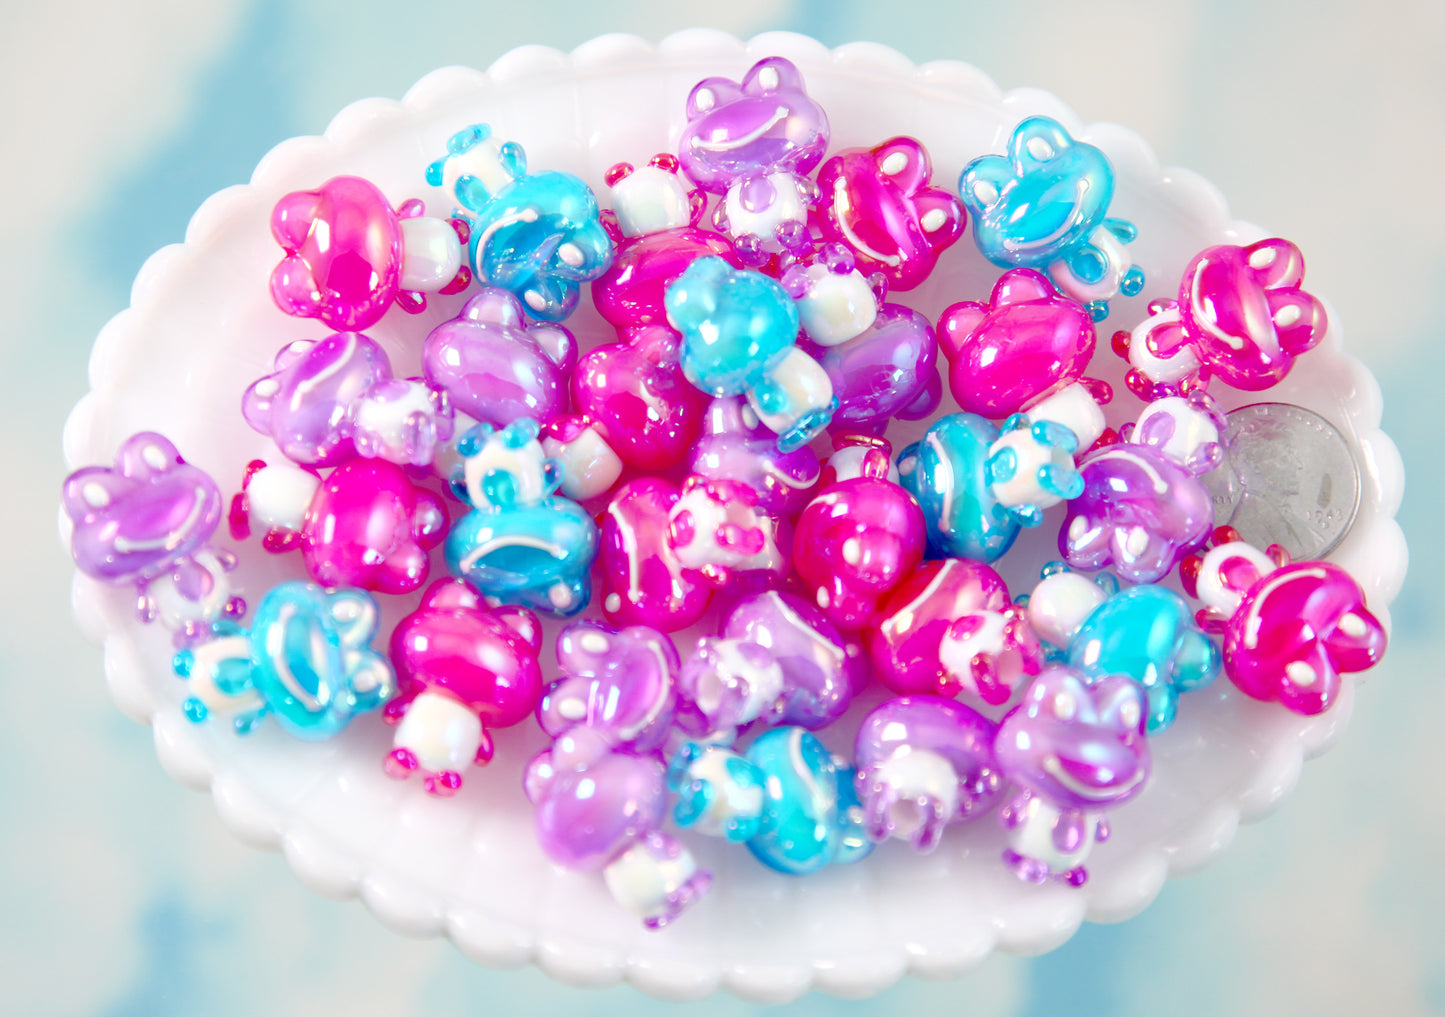 Cute Frog Beads - 22mm AB Frog Colorful Bead Chunky Acrylic or Plastic Beads - 9 pc set